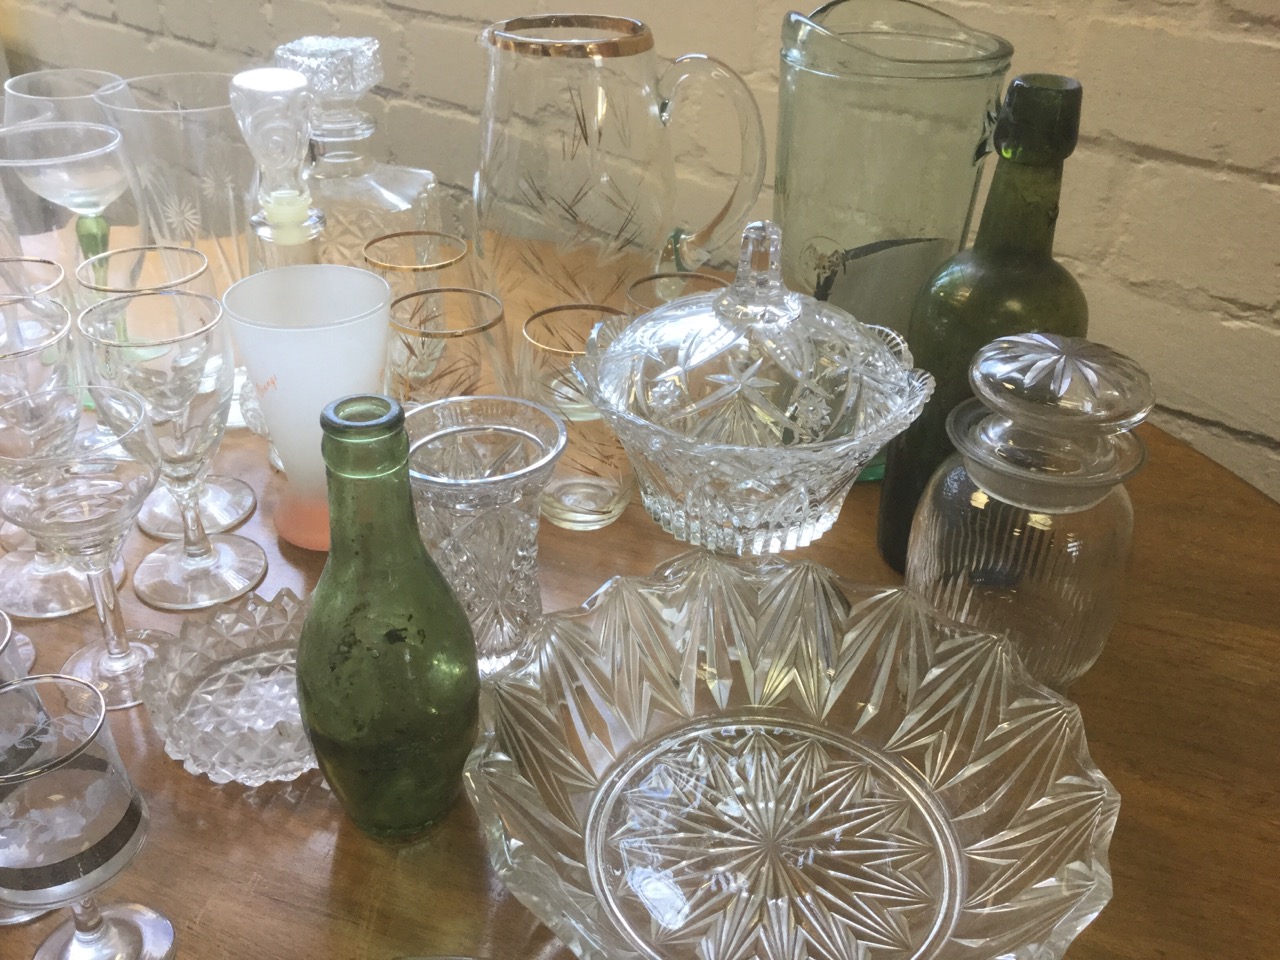 Miscellaneous glass including an Alnwick Brewery bottle, sets of glasses, fruit bowls, a - Image 4 of 6